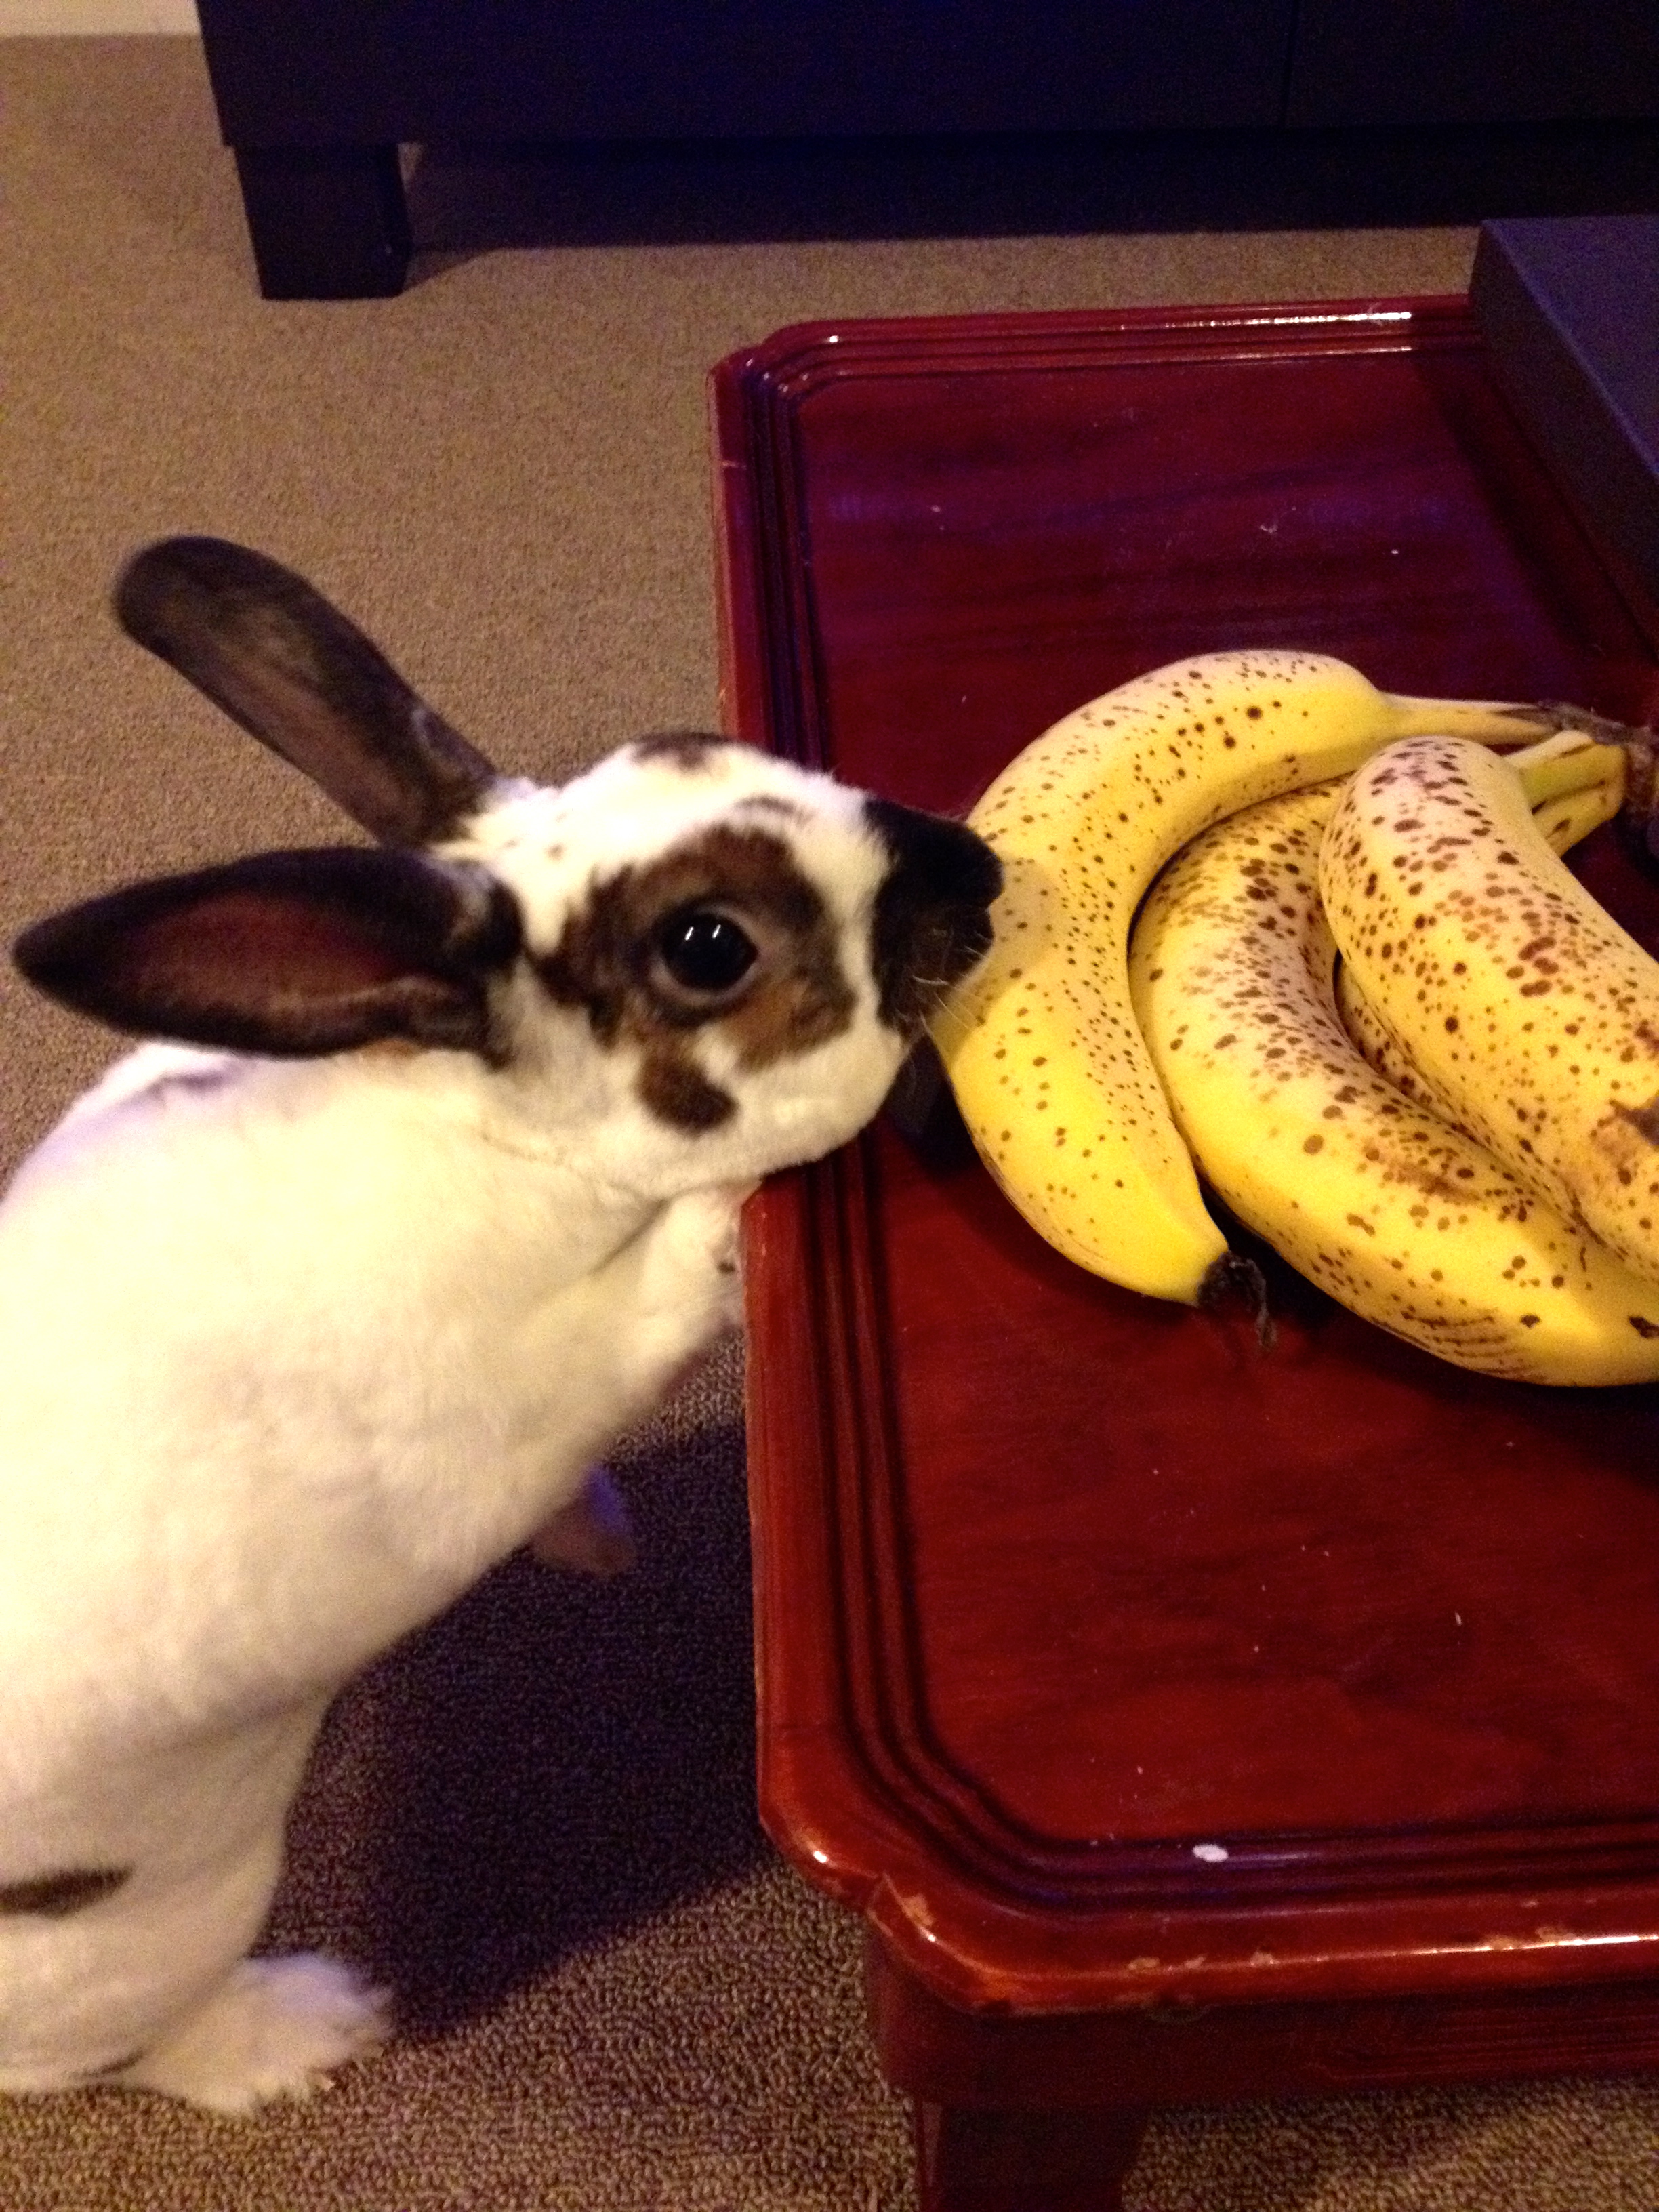 The Infamous Banana Thief Is Caught in the Act!